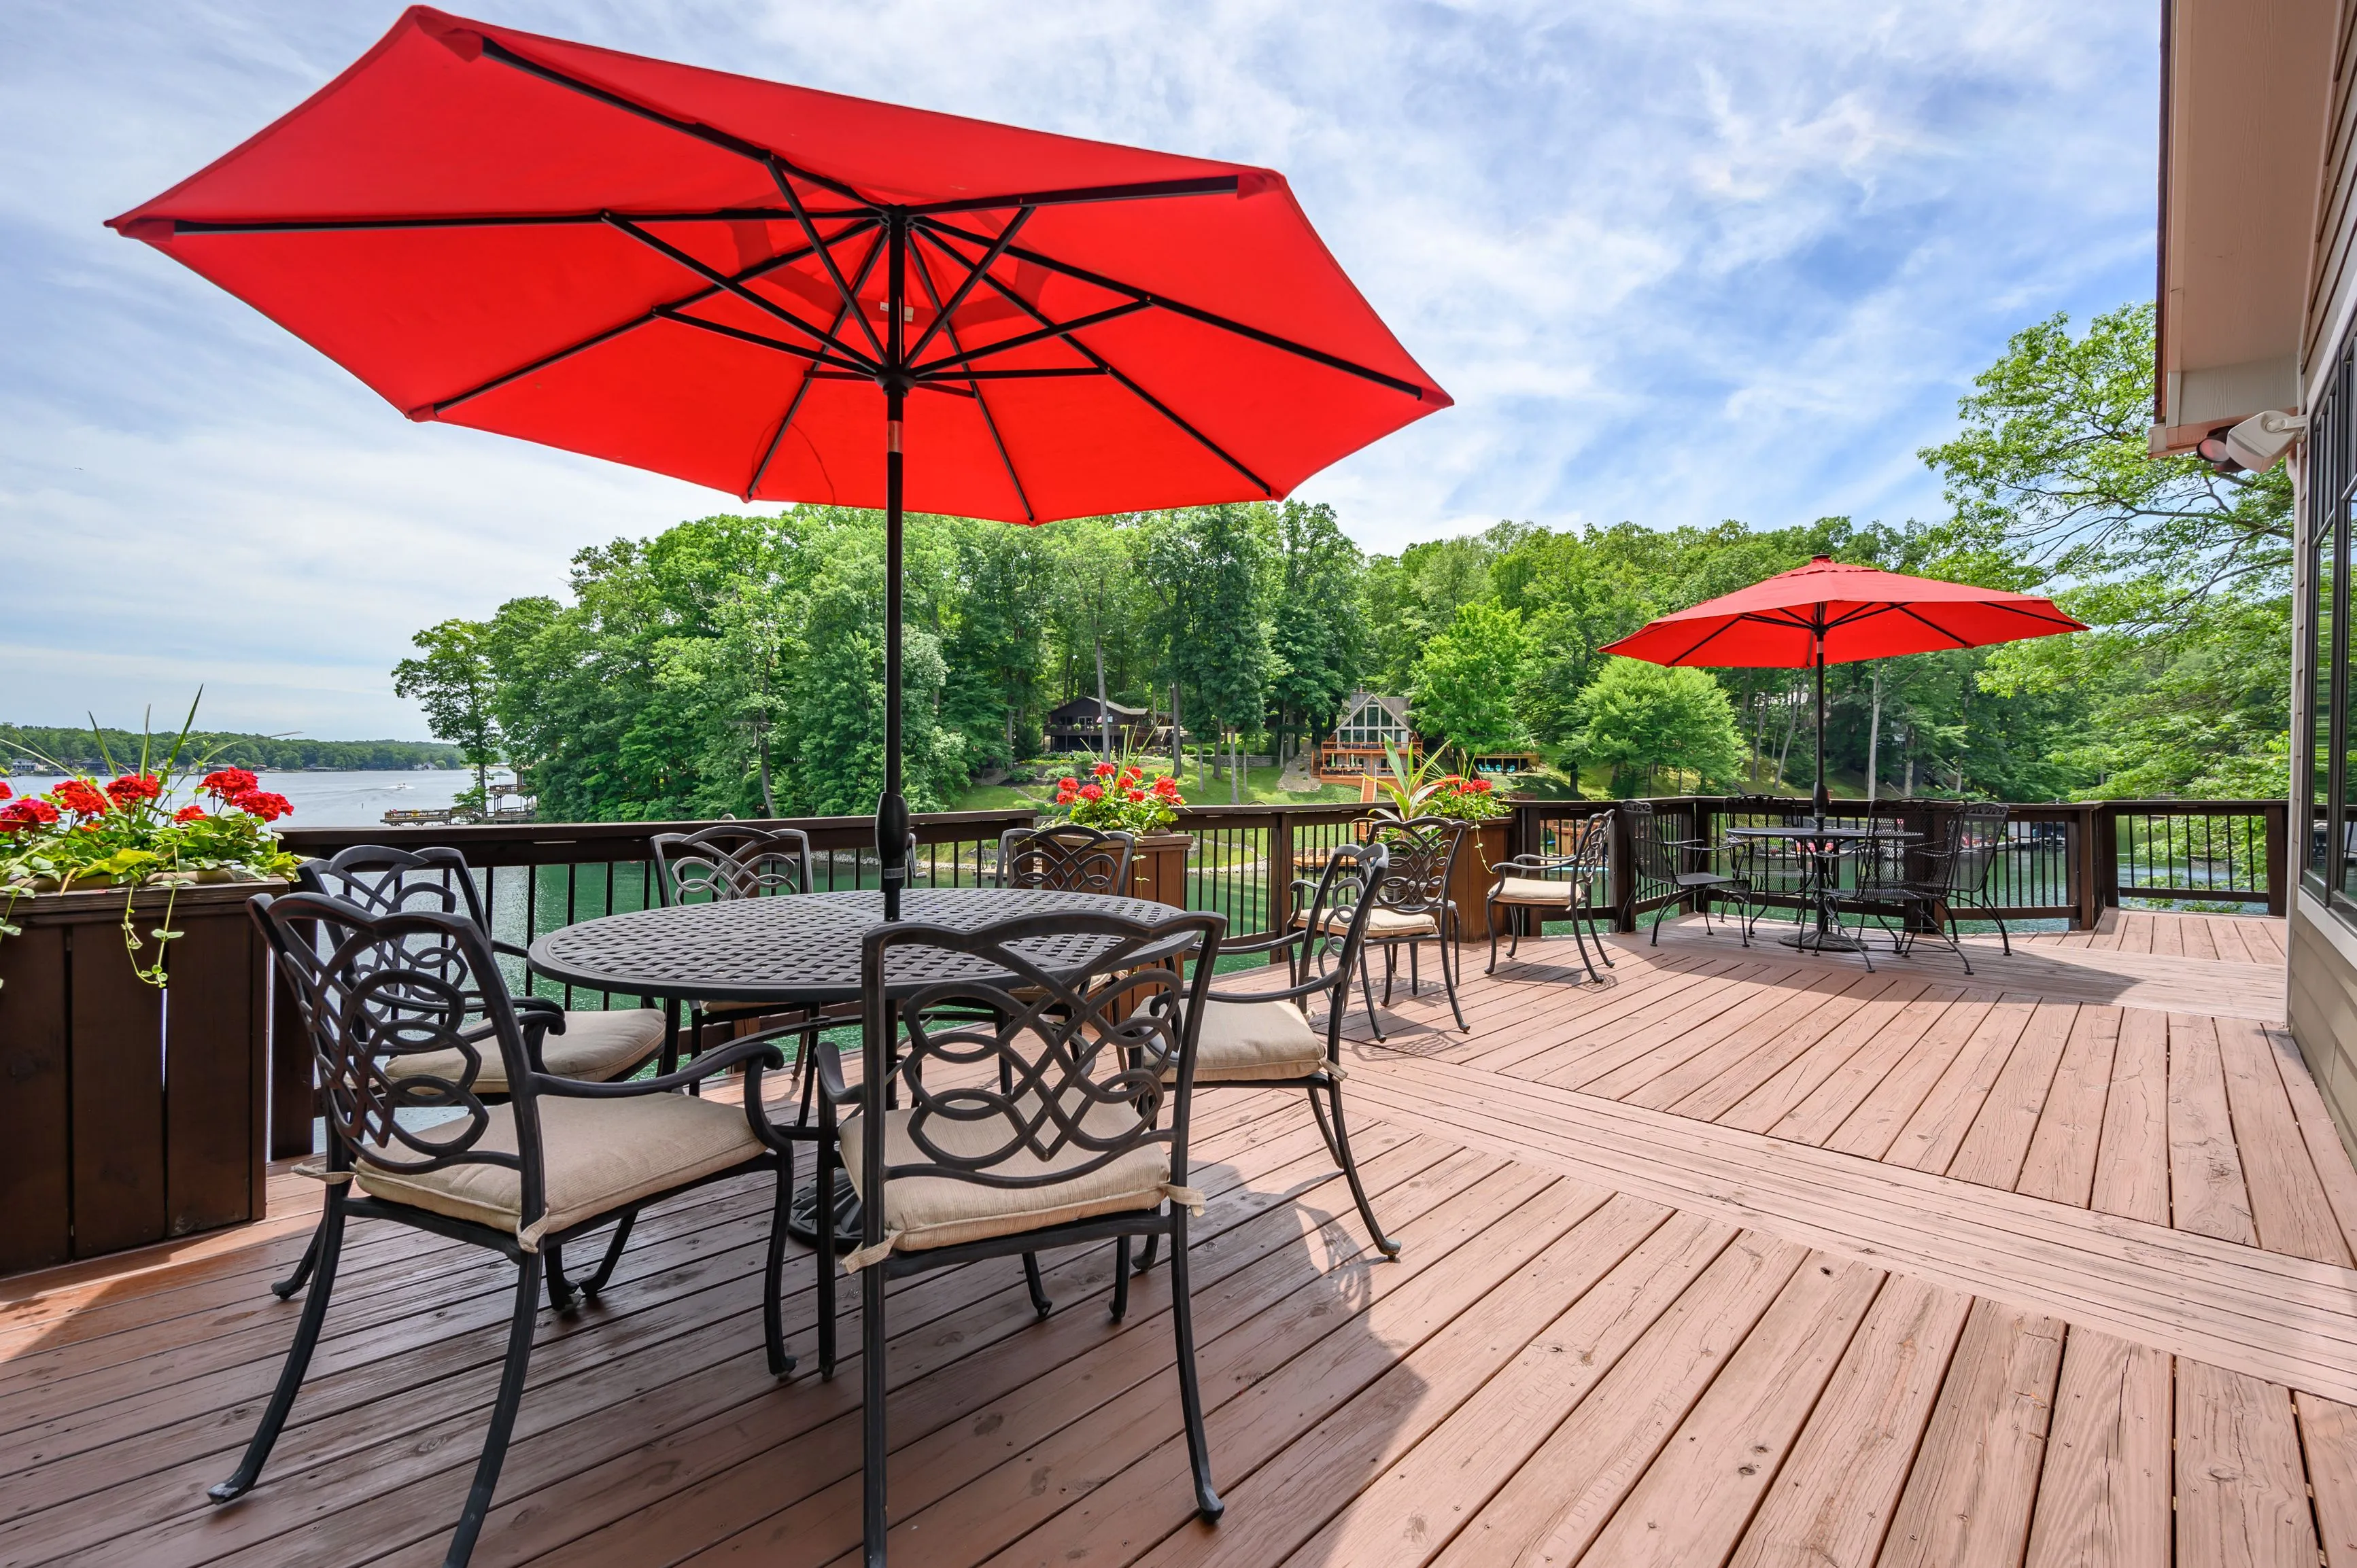 A lakeside deck with outdoor dining furniture under red umbrellas on a sunny day.